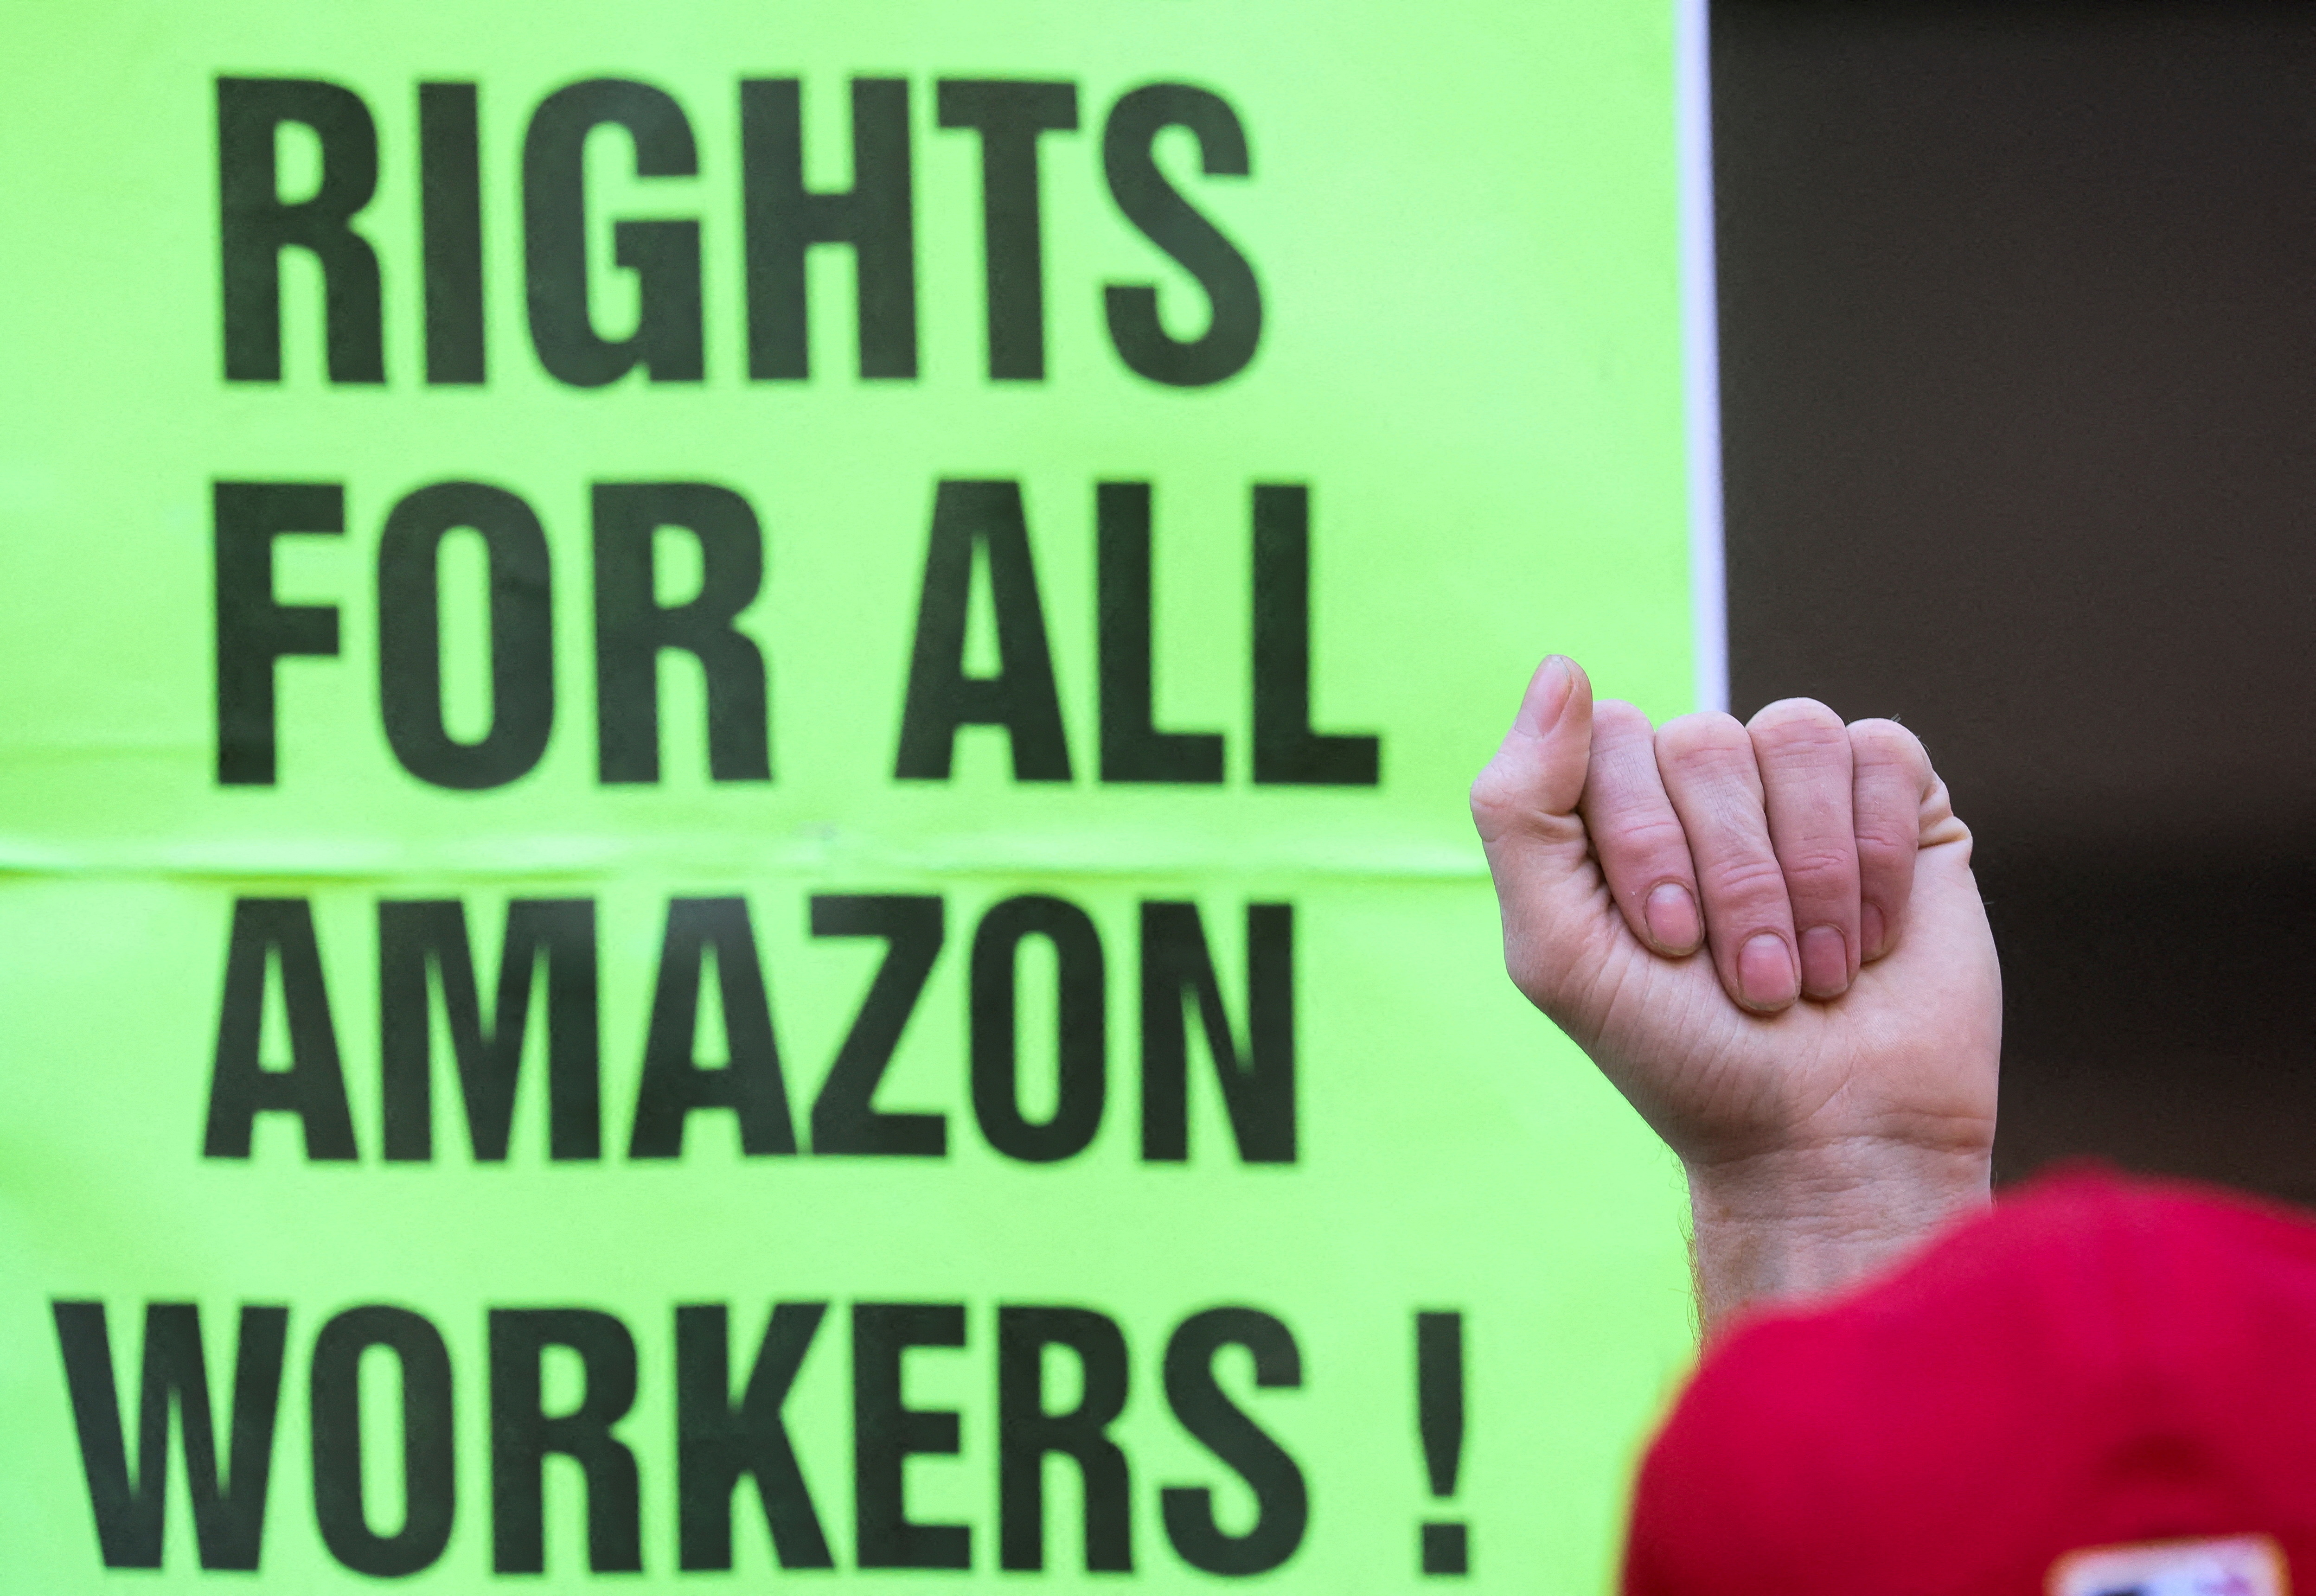 Amazon.com Inc workers react to the outcome of the vote to unionize, in Brooklyn